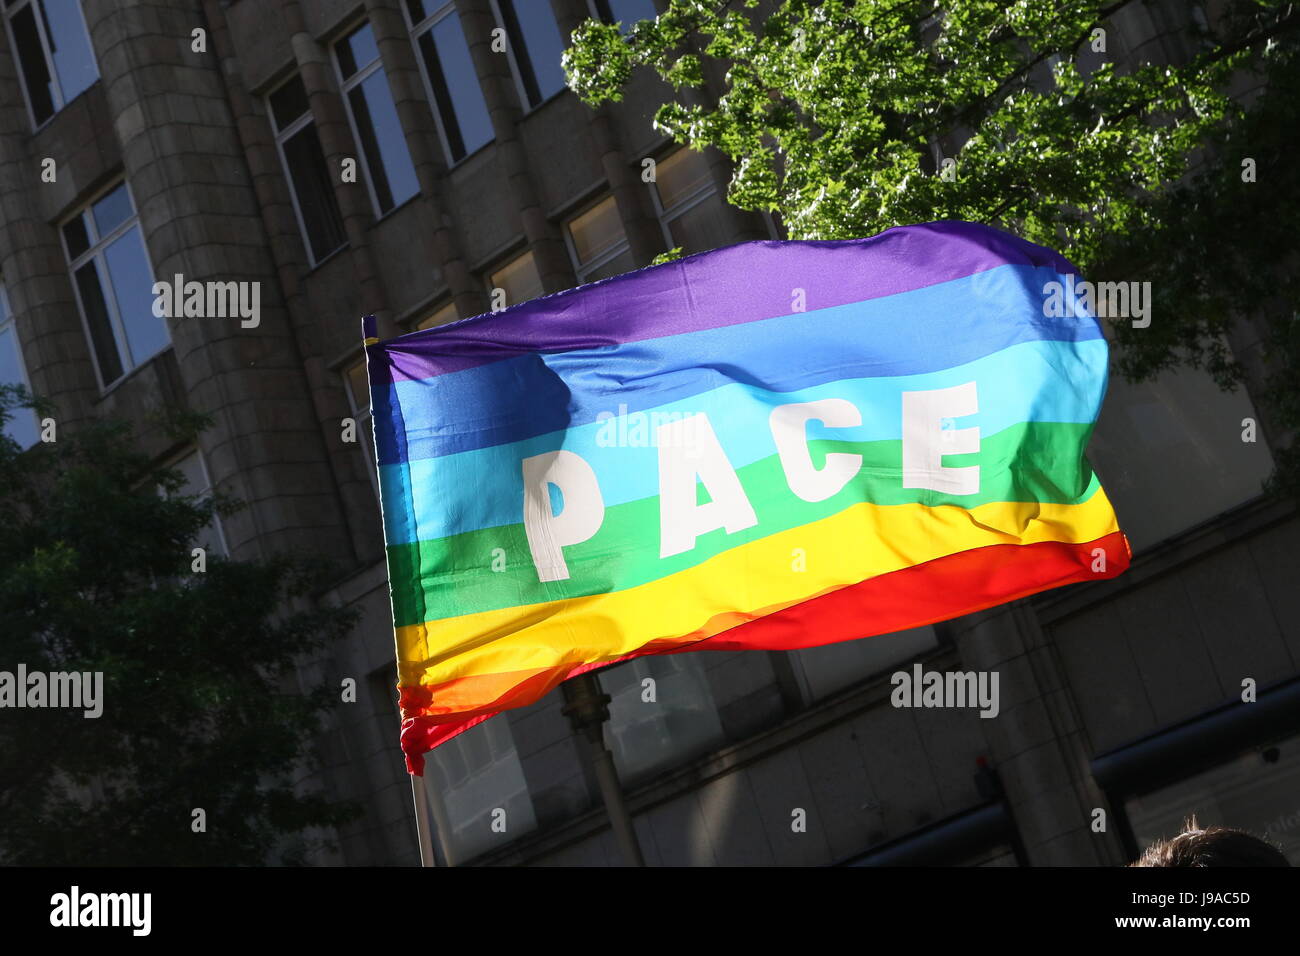 Hamburg, Germany, 31st May, 2017. Protesters waving a 'pace' flag during a demonstration against the G20 summit held at Moenckebergstrasse, Hamburg, Germany, 31.05.2017. Credit: Christopher Tamcke/AlamyLiveNews Stock Photo